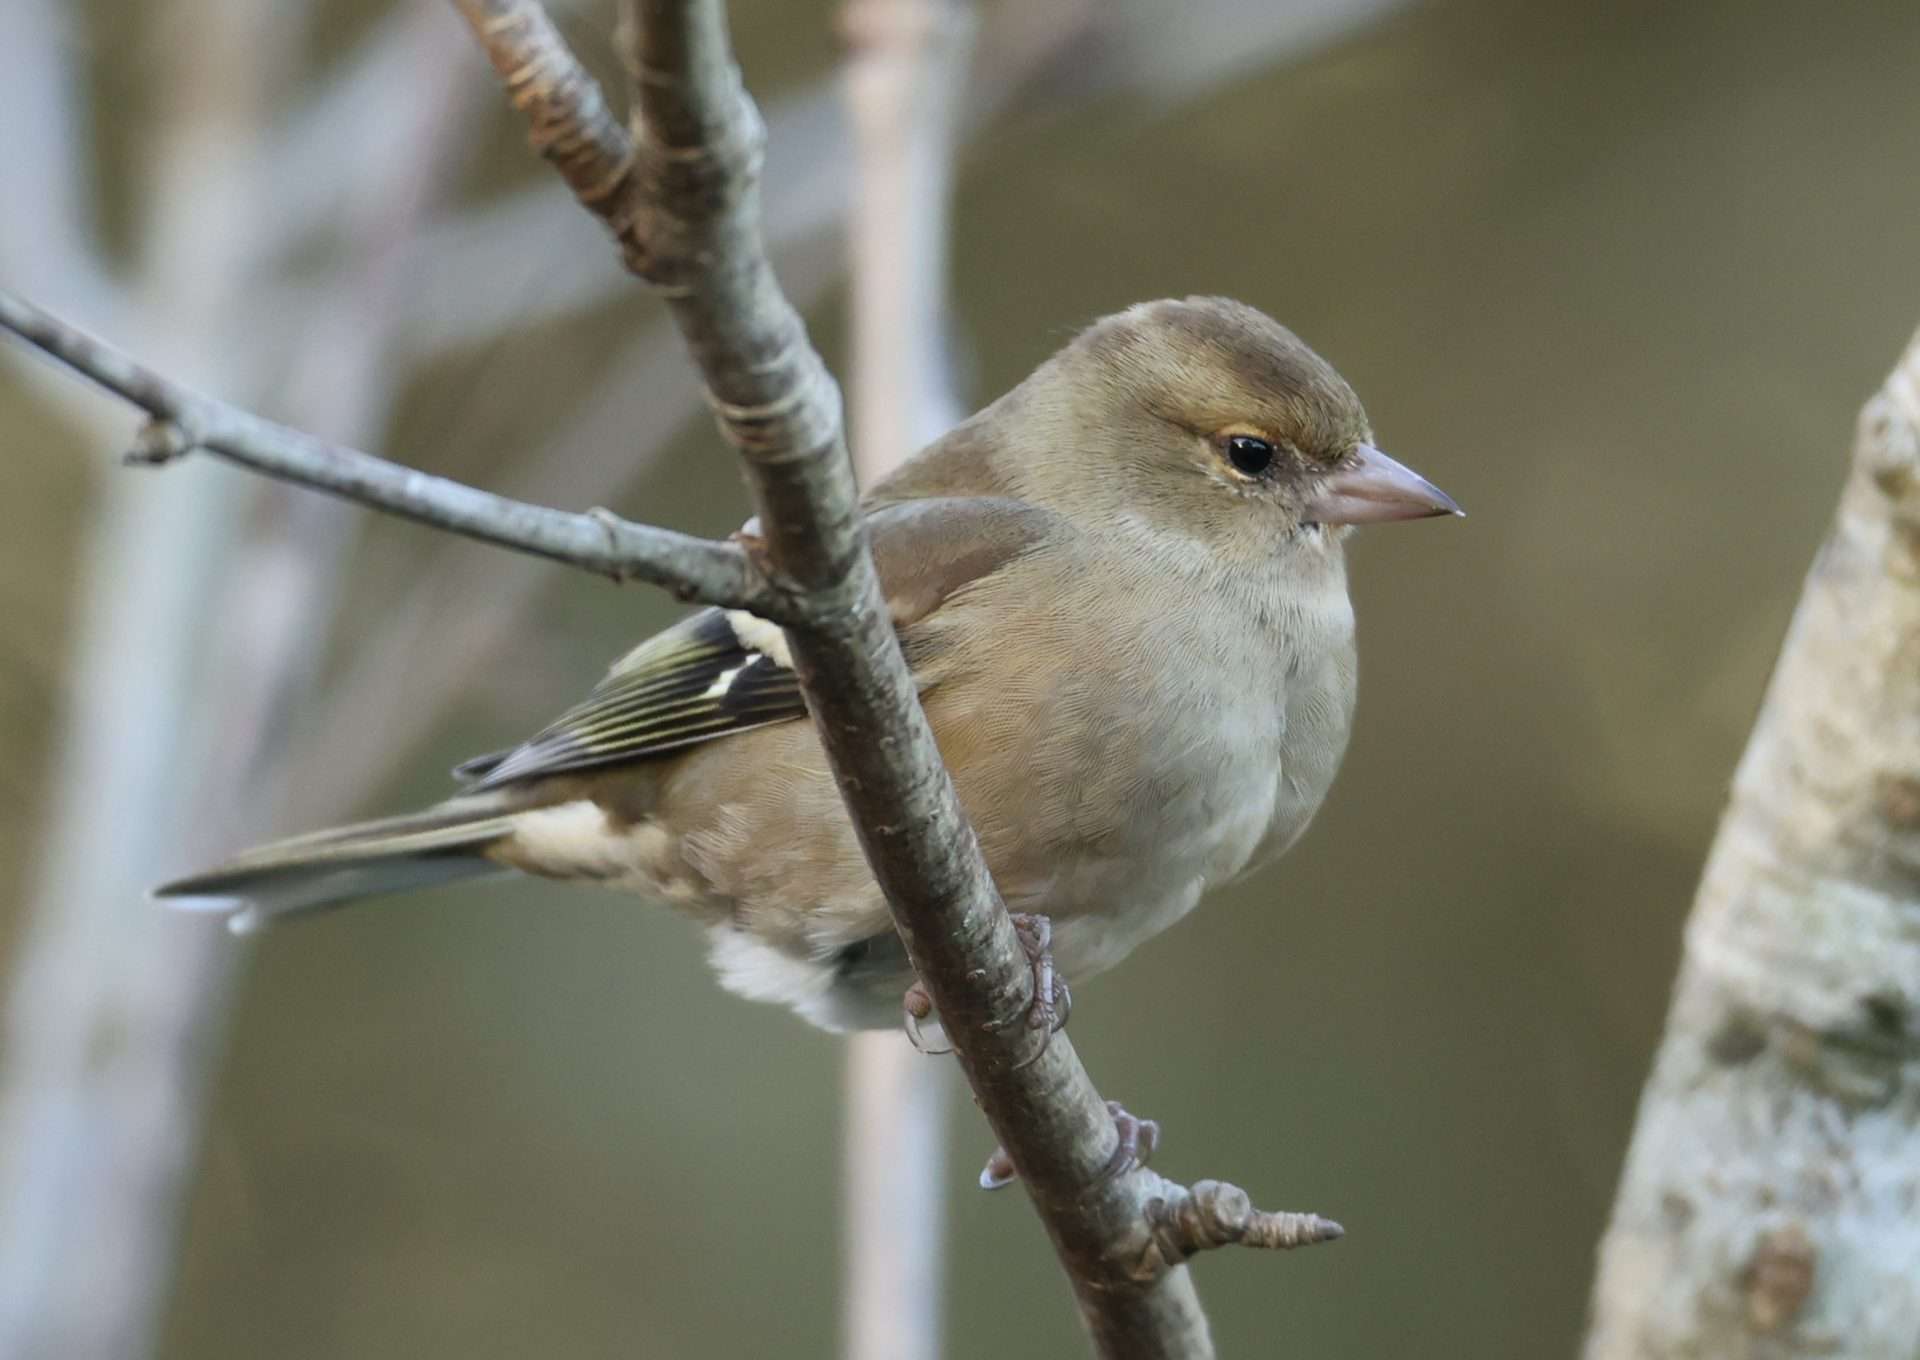 Chaffinch by Steve Hopper at South Brent